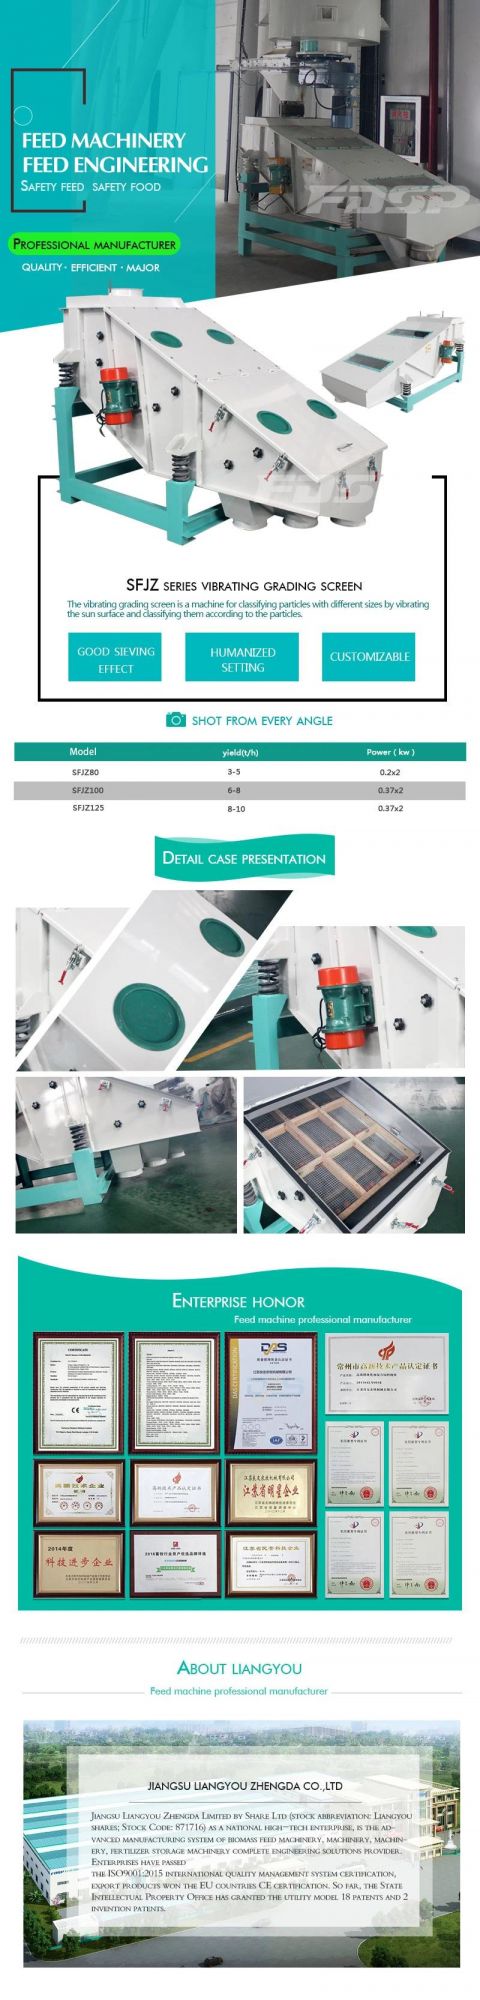 Safety and Reliable Price Vibrating Sifter Screening Machine for Grain Cleaner